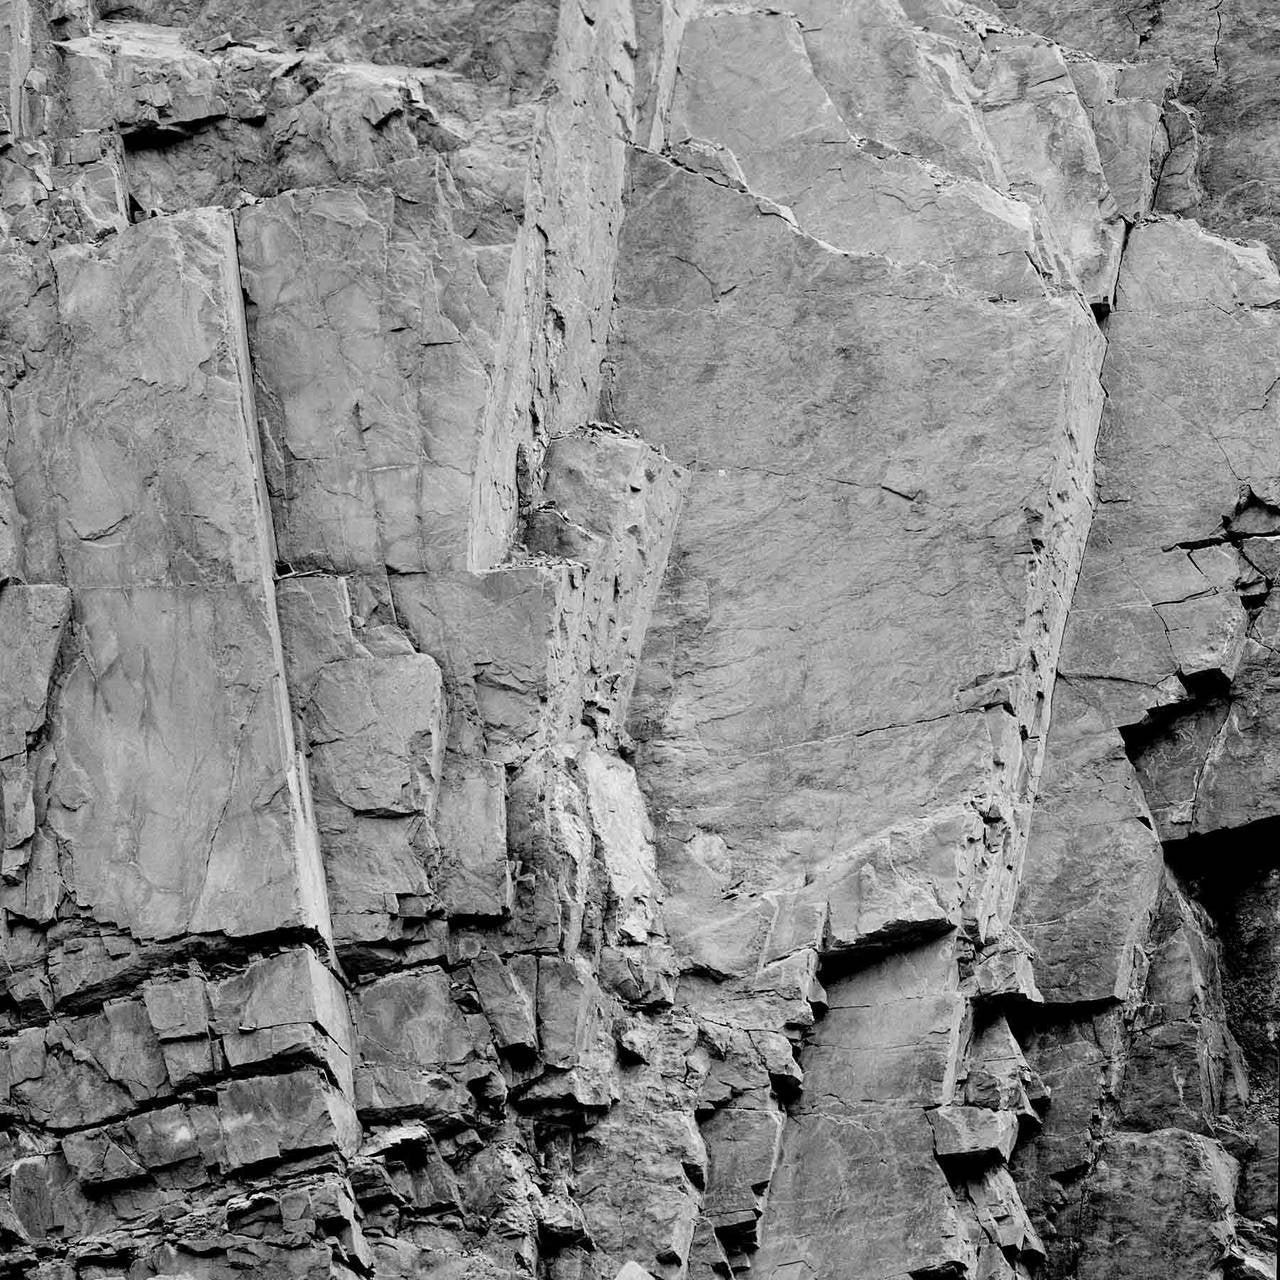 Andrew Buck Landscape Photograph - Rockface 17 (Abstract Square Black and White Photo of Jagged Rock Quarry)